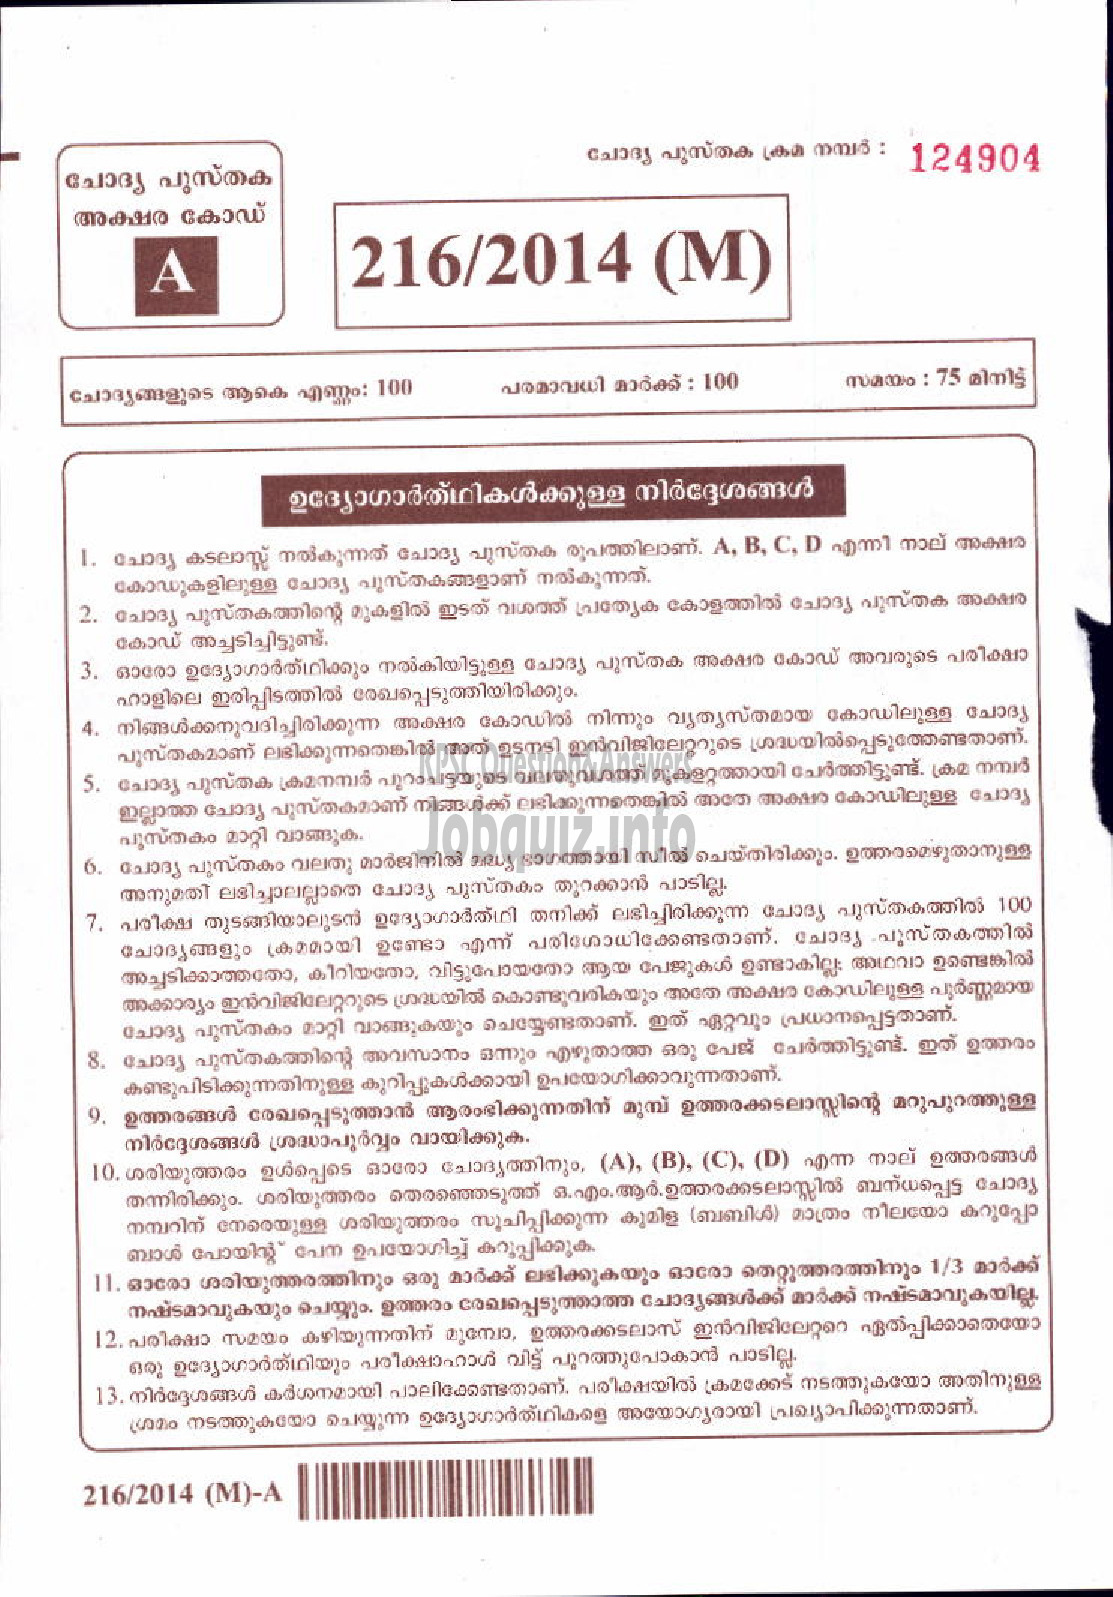 Kerala PSC Question Paper - FITTER AGRICULTURE-1